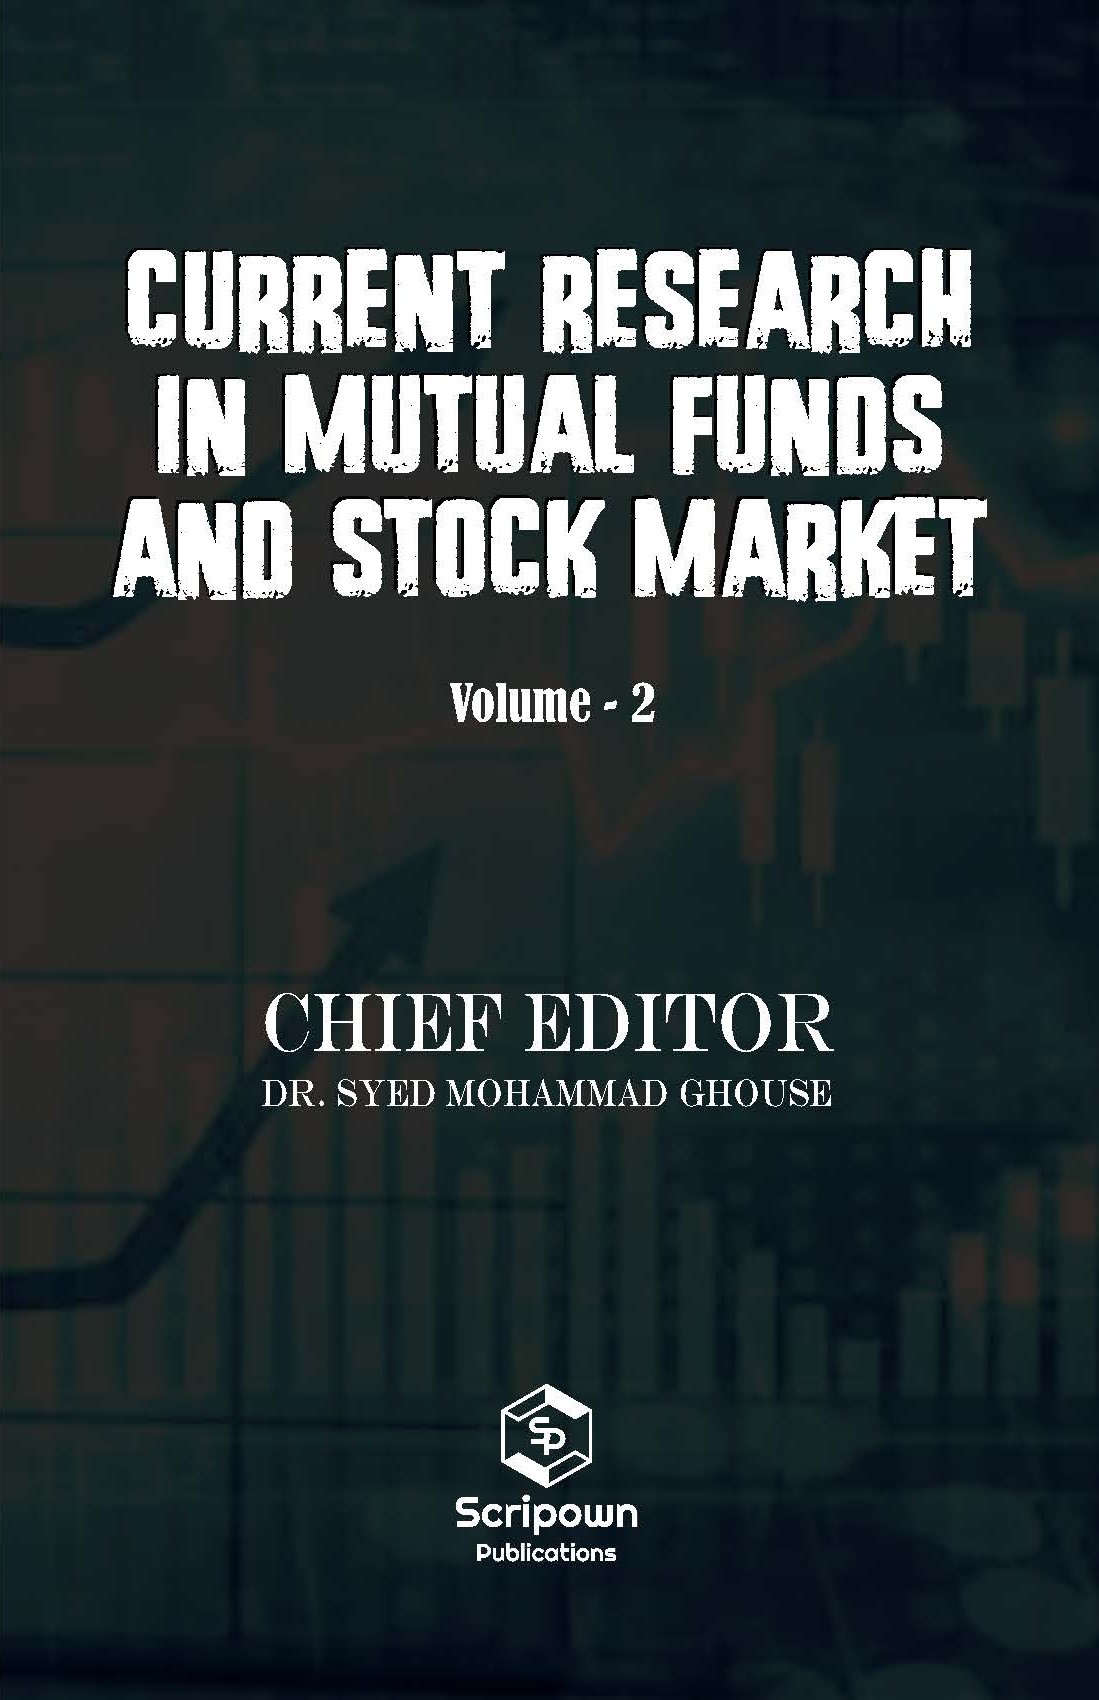 Current Research in Mutual Funds and Stock Market (Volume - 2)